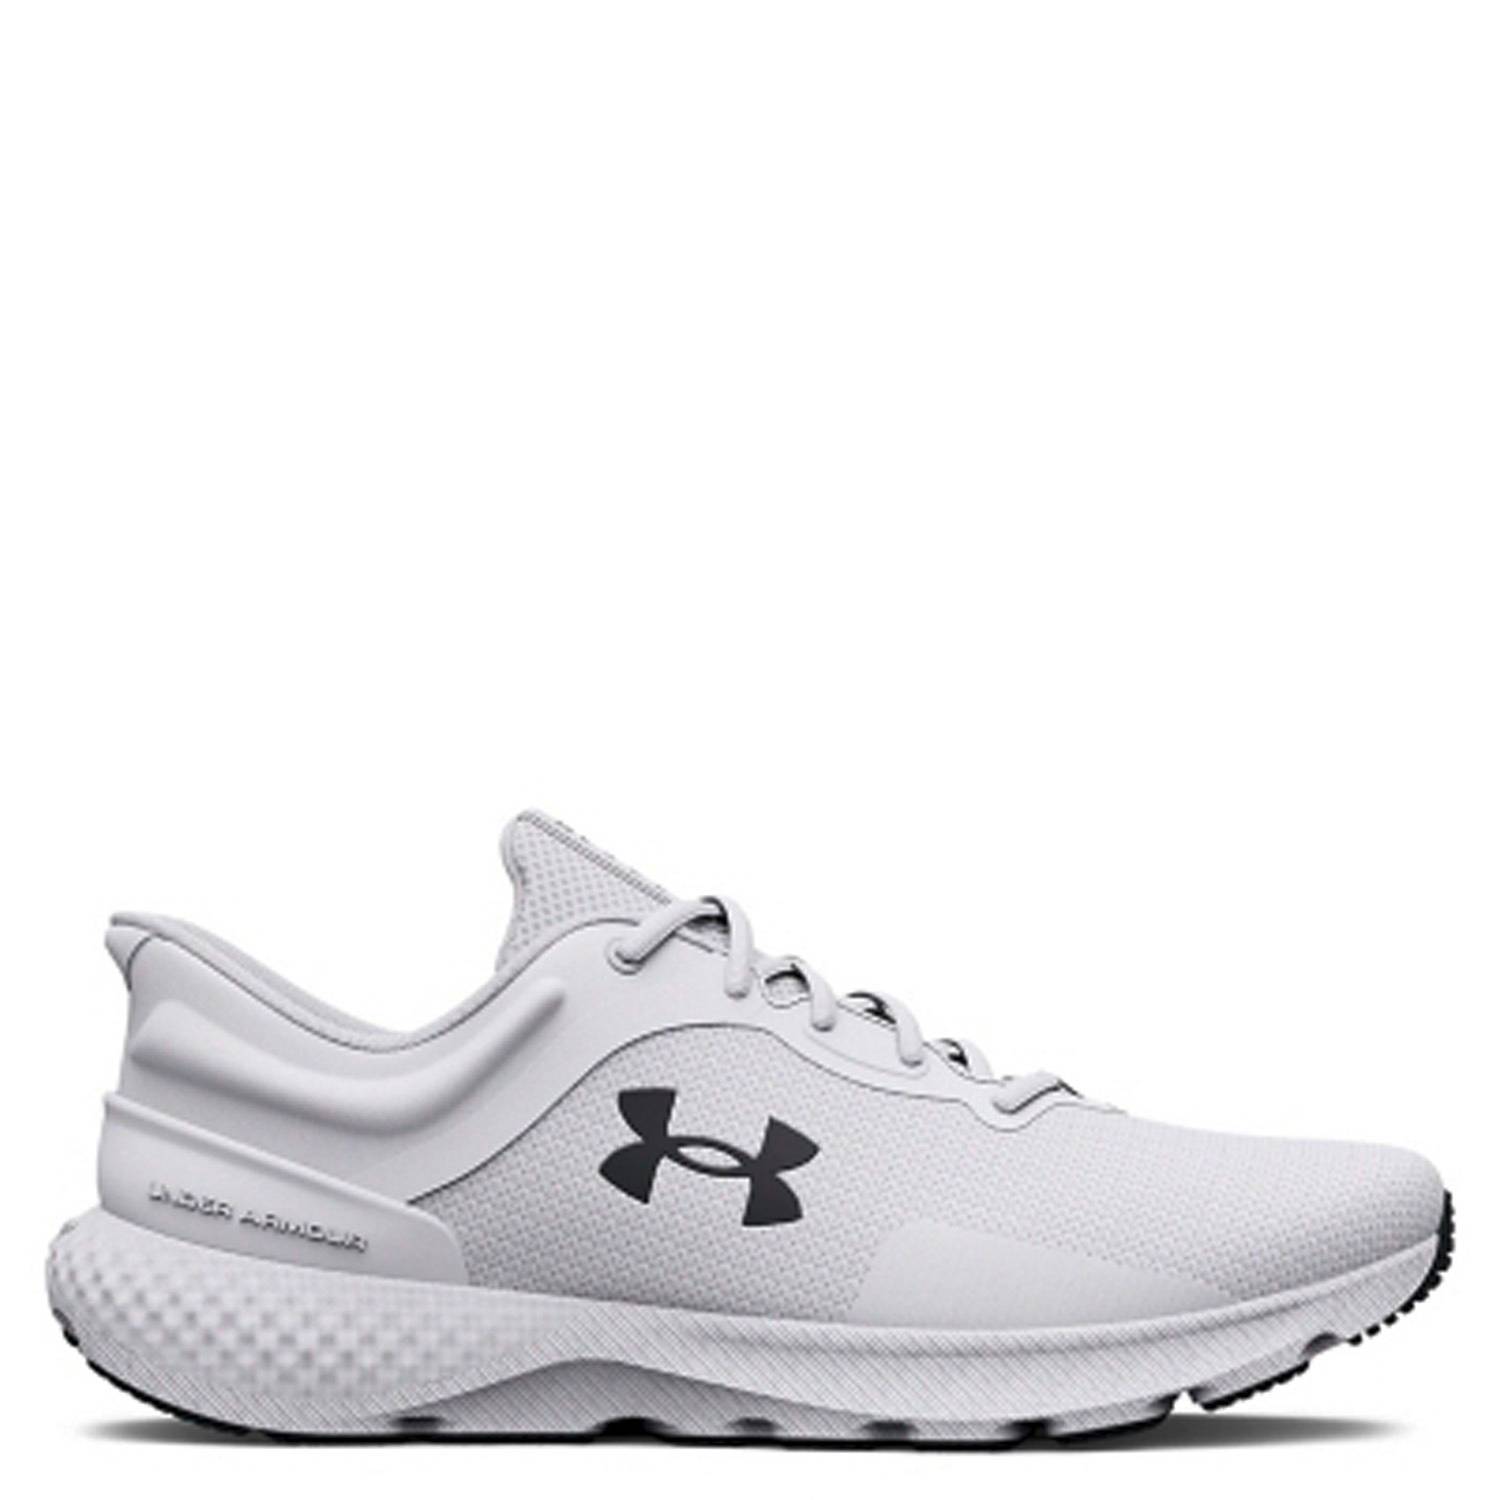 UNDER ARMOUR Charged Escape 4 Zapatilla Running Gris Under Armour falabella.com